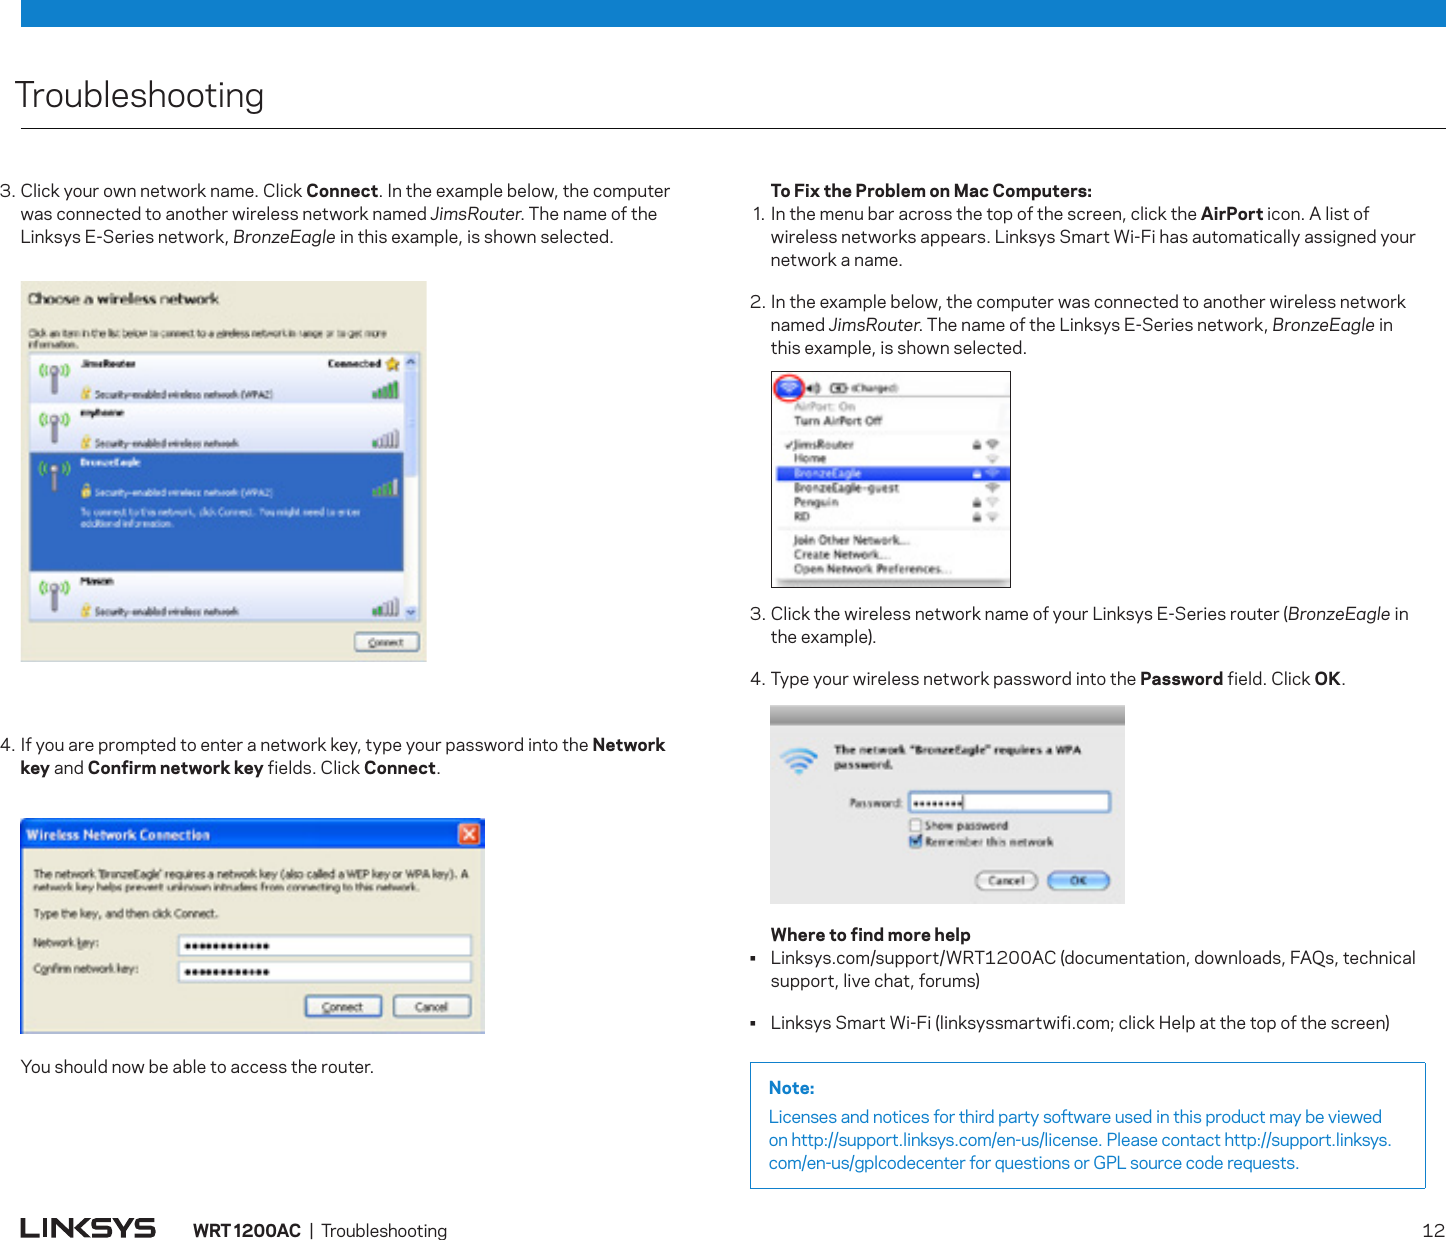 TroubleshootingNote:Licenses and notices for third party software used in this product may be viewed on http://support.linksys.com/en-us/license. Please contact http://support.linksys.com/en-us/gplcodecenter for questions or GPL source code requests.WRT 200AC  |  Troubleshooting   123. Click your own network name. Click Connect. In the example below, the computer was connected to another wireless network named JimsRouter. The name of the Linksys E-Series network, BronzeEagle in this example, is shown selected.4. If you are prompted to enter a network key, type your password into the Network key and Confirm network key fields. Click Connect.   You should now be able to access the router.  To Fix the Problem on Mac Computers: . In the menu bar across the top of the screen, click the AirPort icon. A list of wireless networks appears. Linksys Smart Wi-Fi has automatically assigned your network a name.2. In the example below, the computer was connected to another wireless network named JimsRouter. The name of the Linksys E-Series network, BronzeEagle in  this example, is shown selected.3. Click the wireless network name of your Linksys E-Series router (BronzeEagle in  the example).4. Type your wireless network password into the Password field. Click OK.  Where to find more help•  Linksys.com/support/WRT1200AC (documentation, downloads, FAQs, technical support, live chat, forums)•  Linksys Smart Wi-Fi (linksyssmartwifi.com; click Help at the top of the screen)